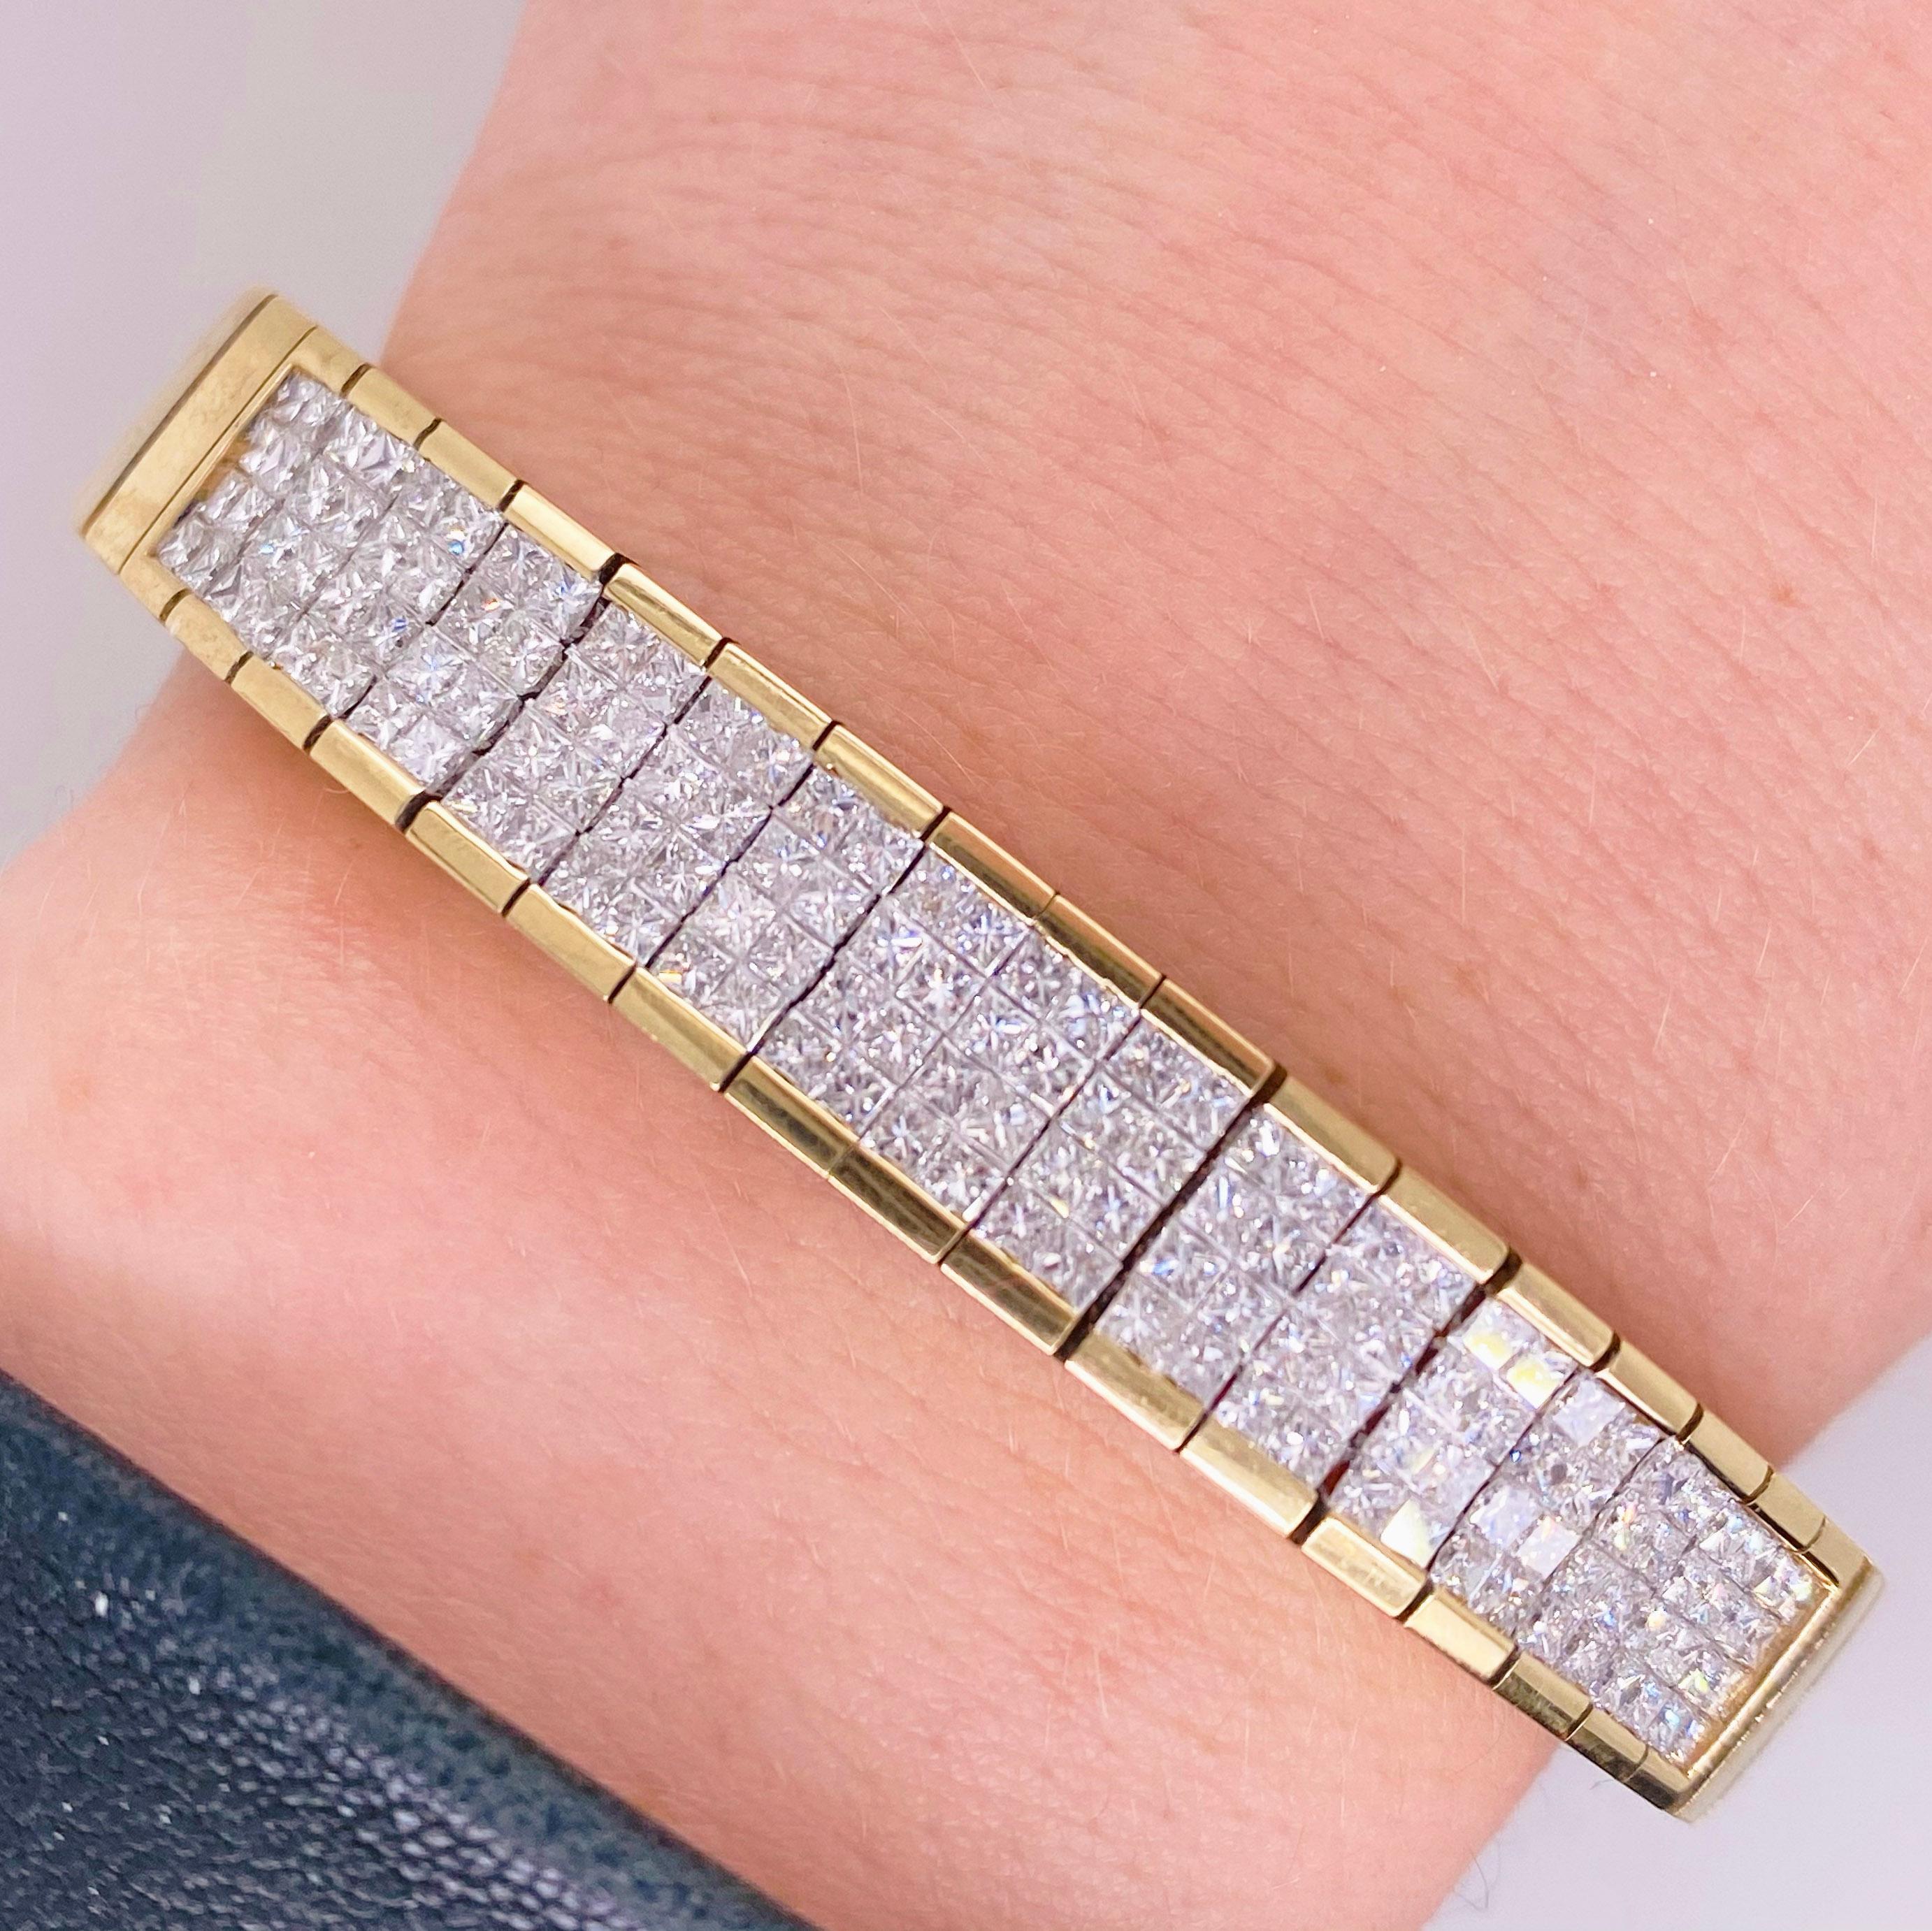 Diamond Paved Bracelet with 4 carat (4.00 ct) total weight of princess cut diamonds

The perfect accessory for everyday or a formal event! This diamond bracelet is unlike any other, with 4 carats of square/princess diamonds invisibly set. The